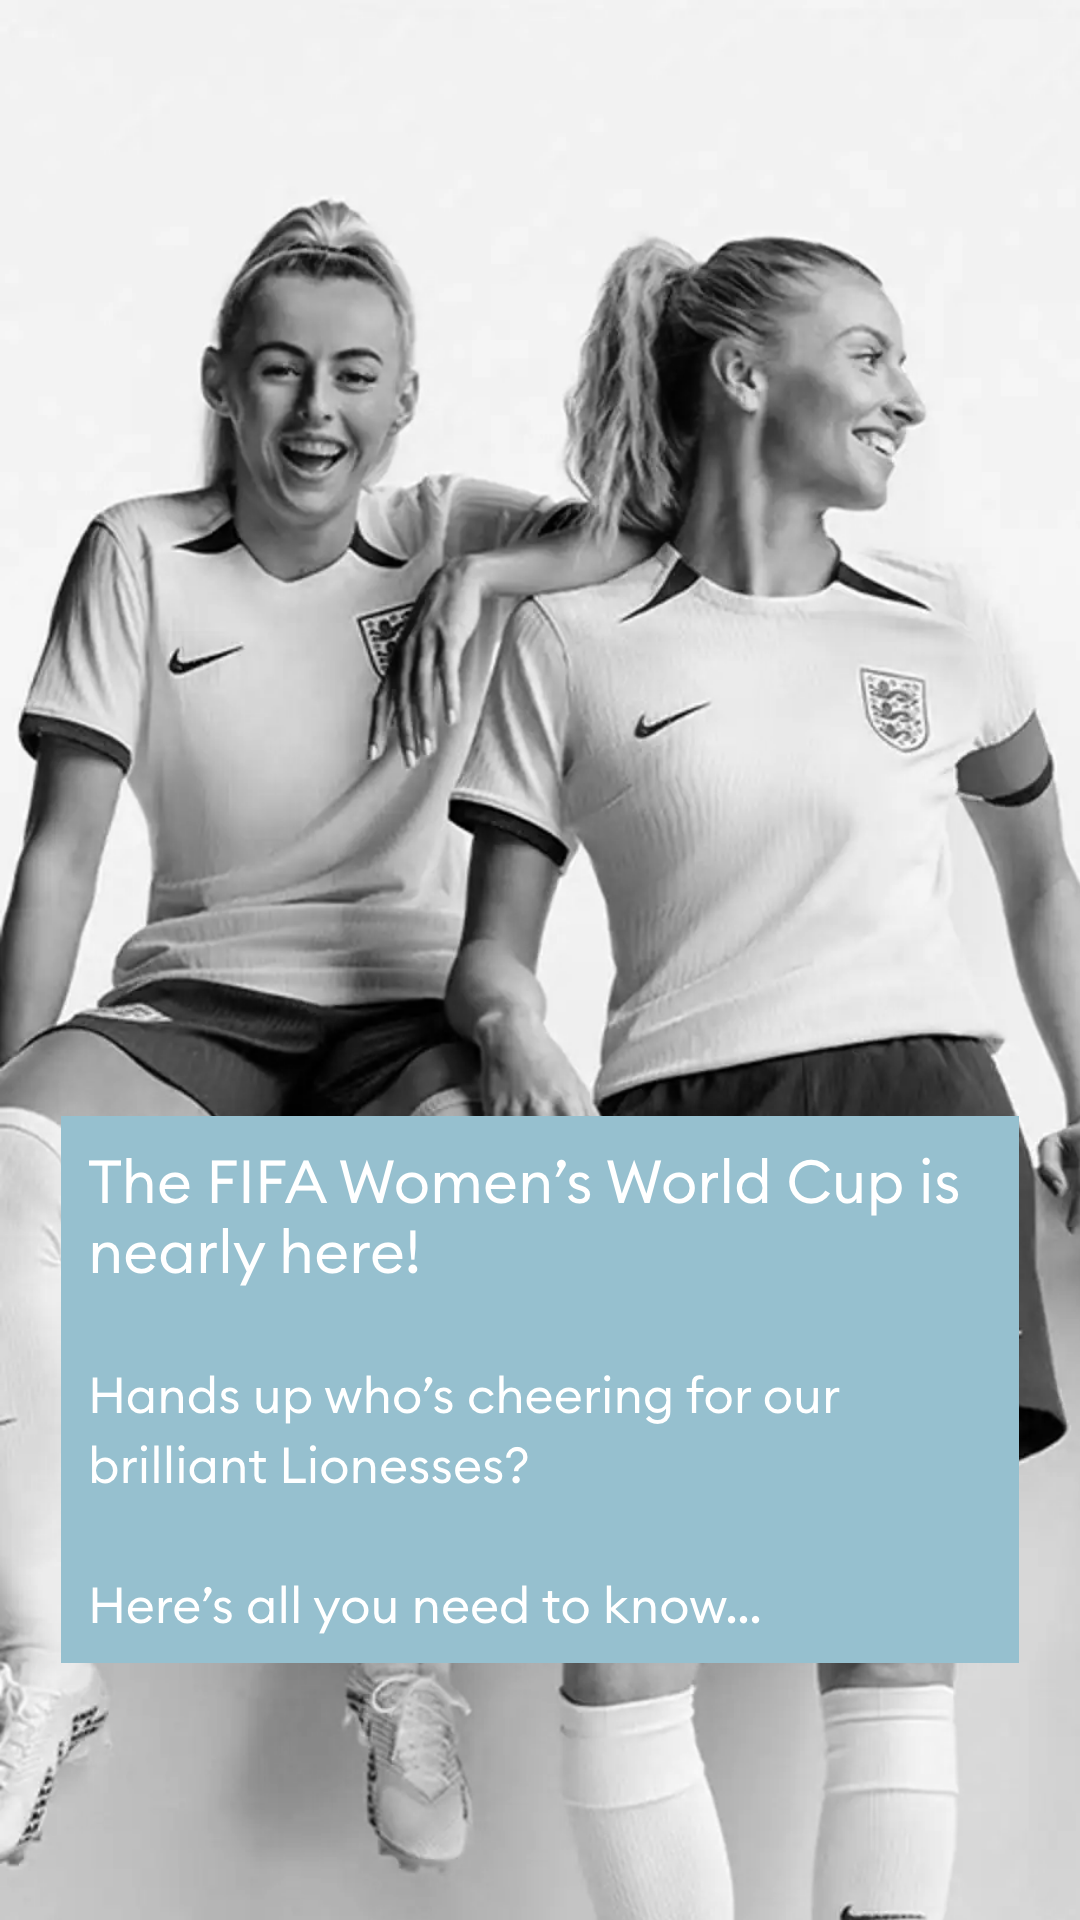 Let’s hear it for the Lionesses: FIFA Women's World Cup 2023